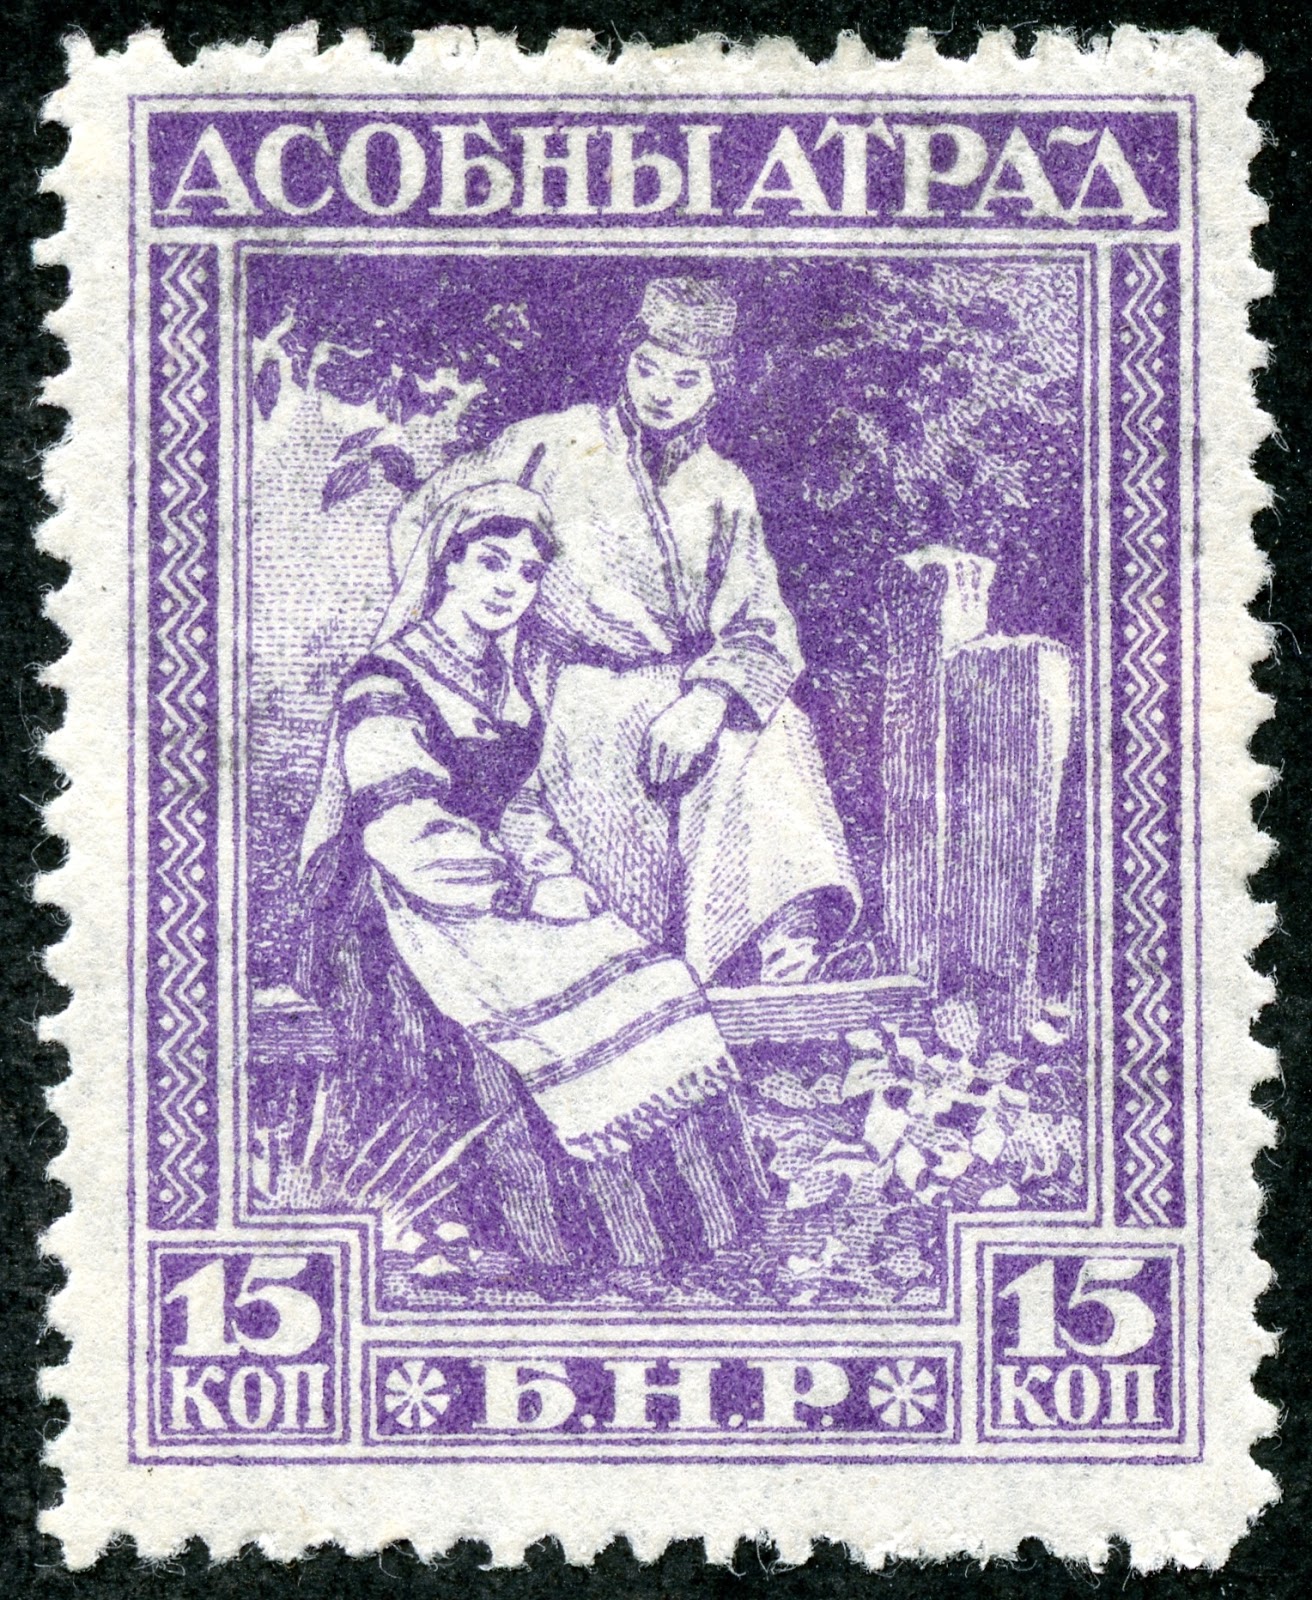 Big Blue 1840-1940: White Russia - Labels and Forgeries